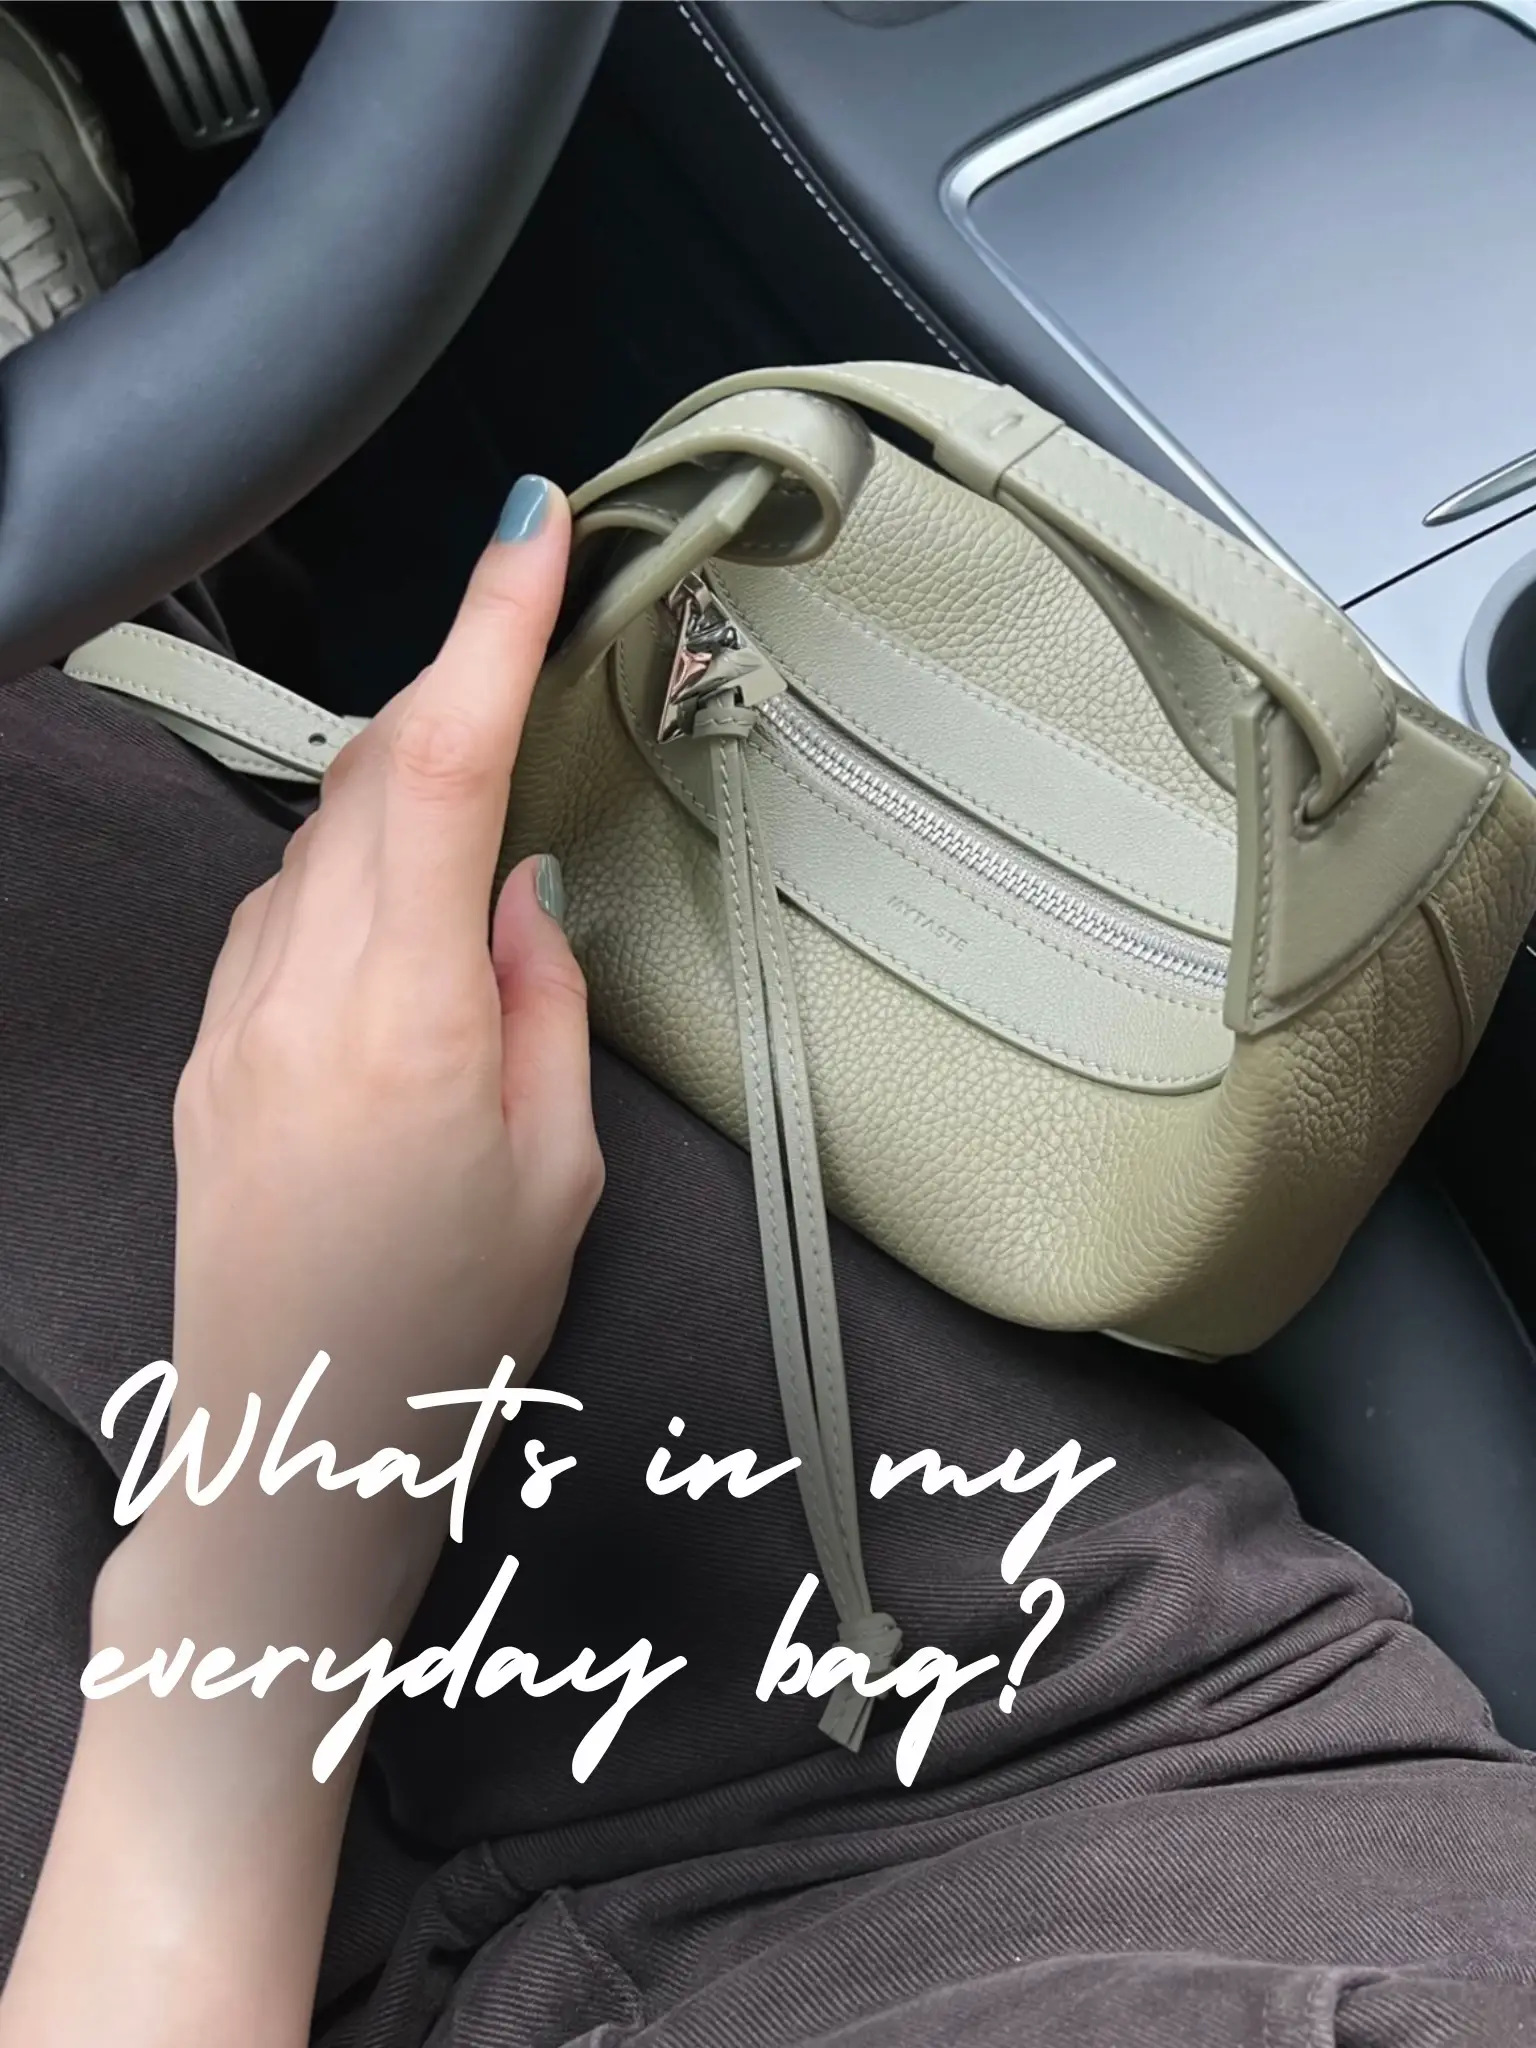 Chanel classic flap bag in midnight blue review & what's in my bag – Follow  Meesh